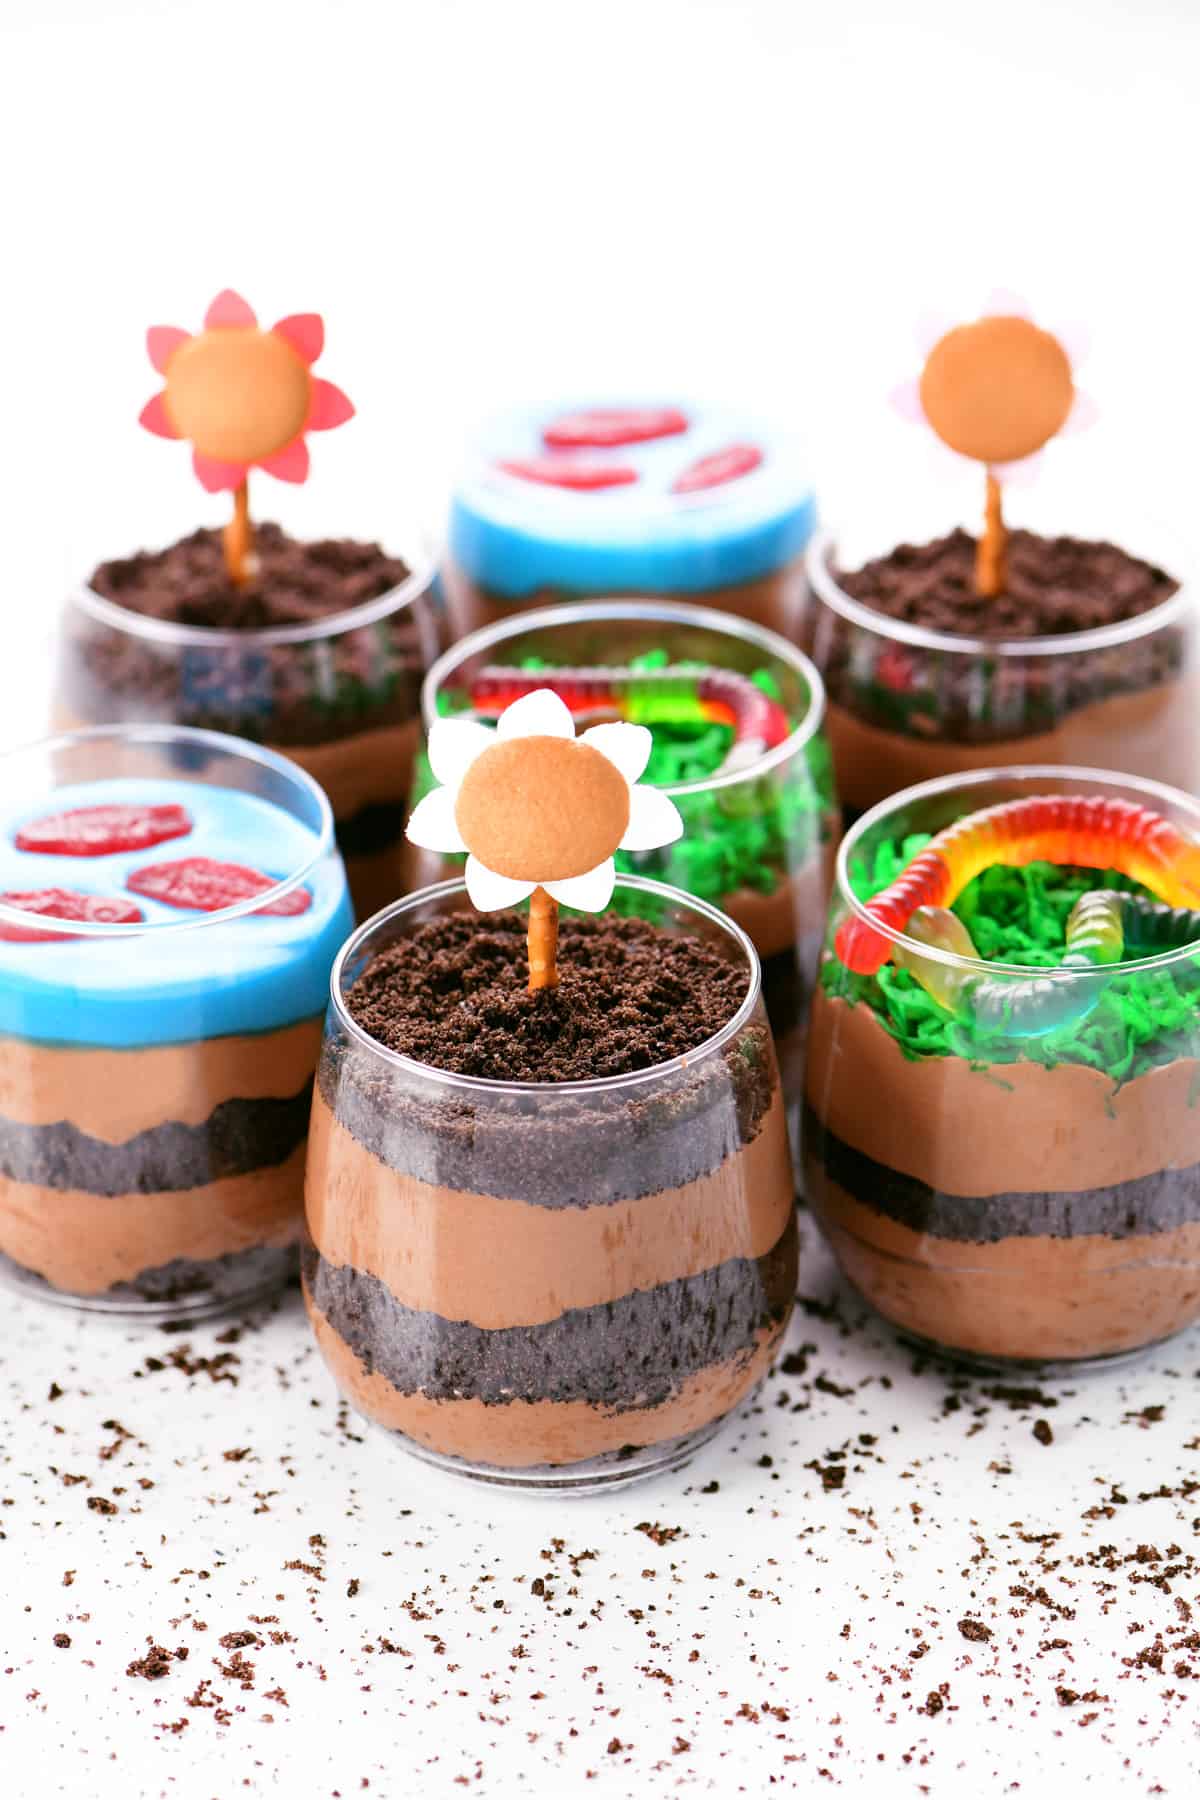 Chocolate pudding dirt cake cups topped with Oreos, gummy fish, gummy worms, and edible flowers.